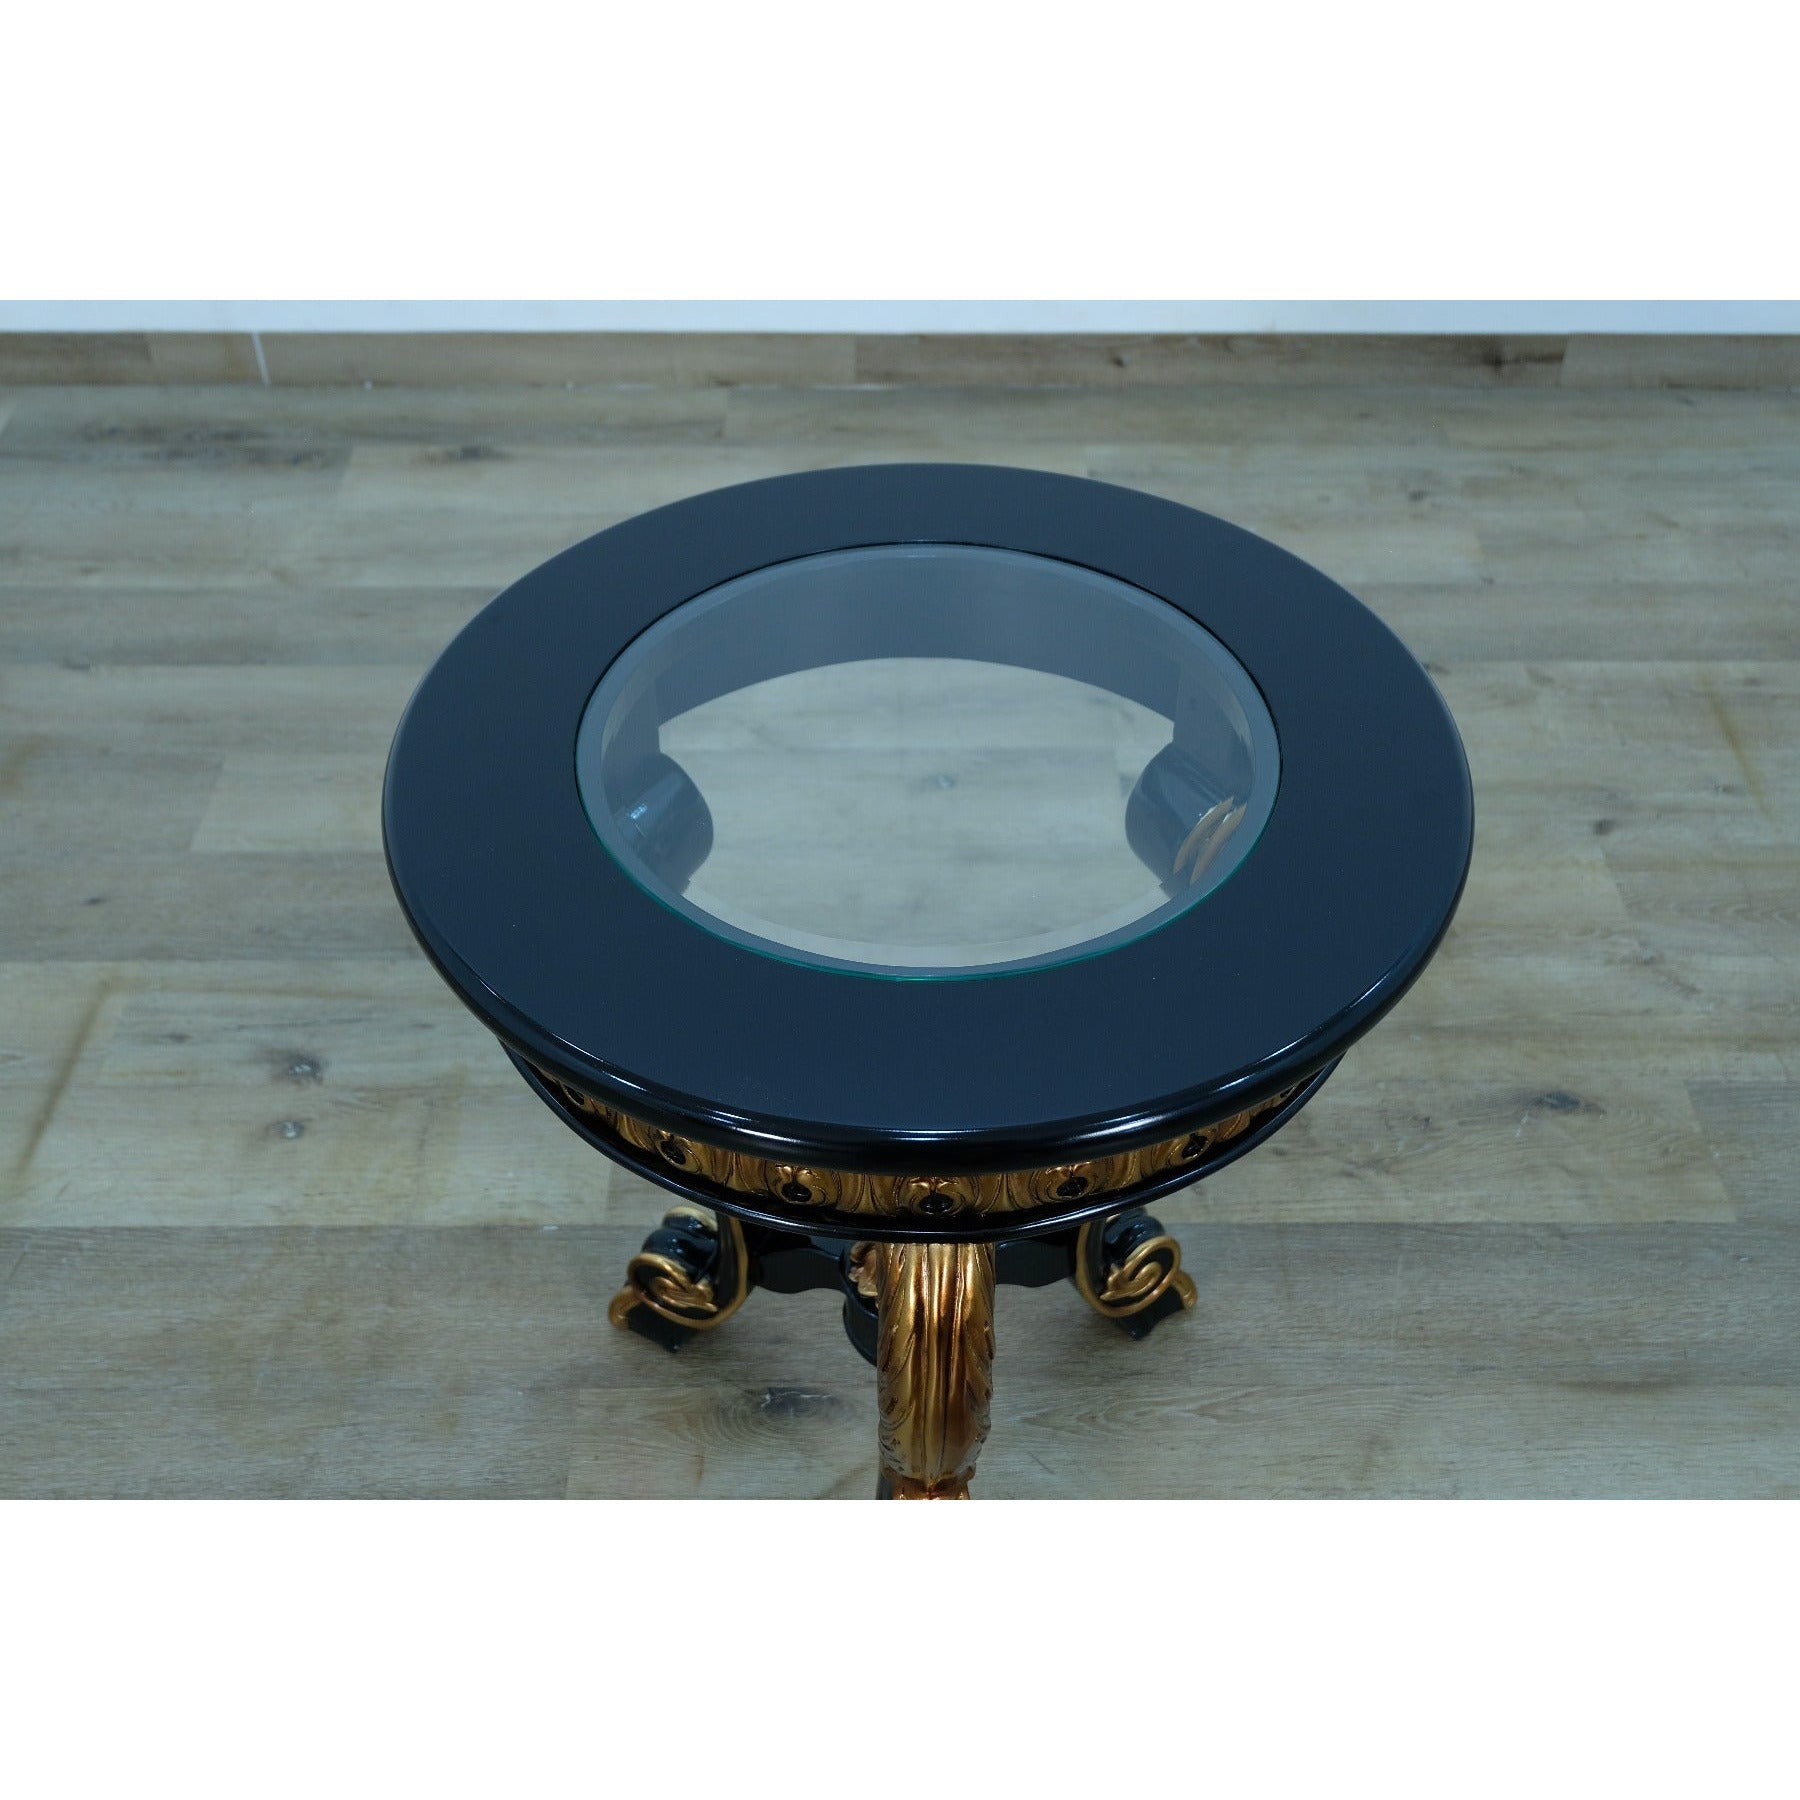 European Furniture - Bellagio III End Table in Black-Gold - 30019-ET - New Star Living